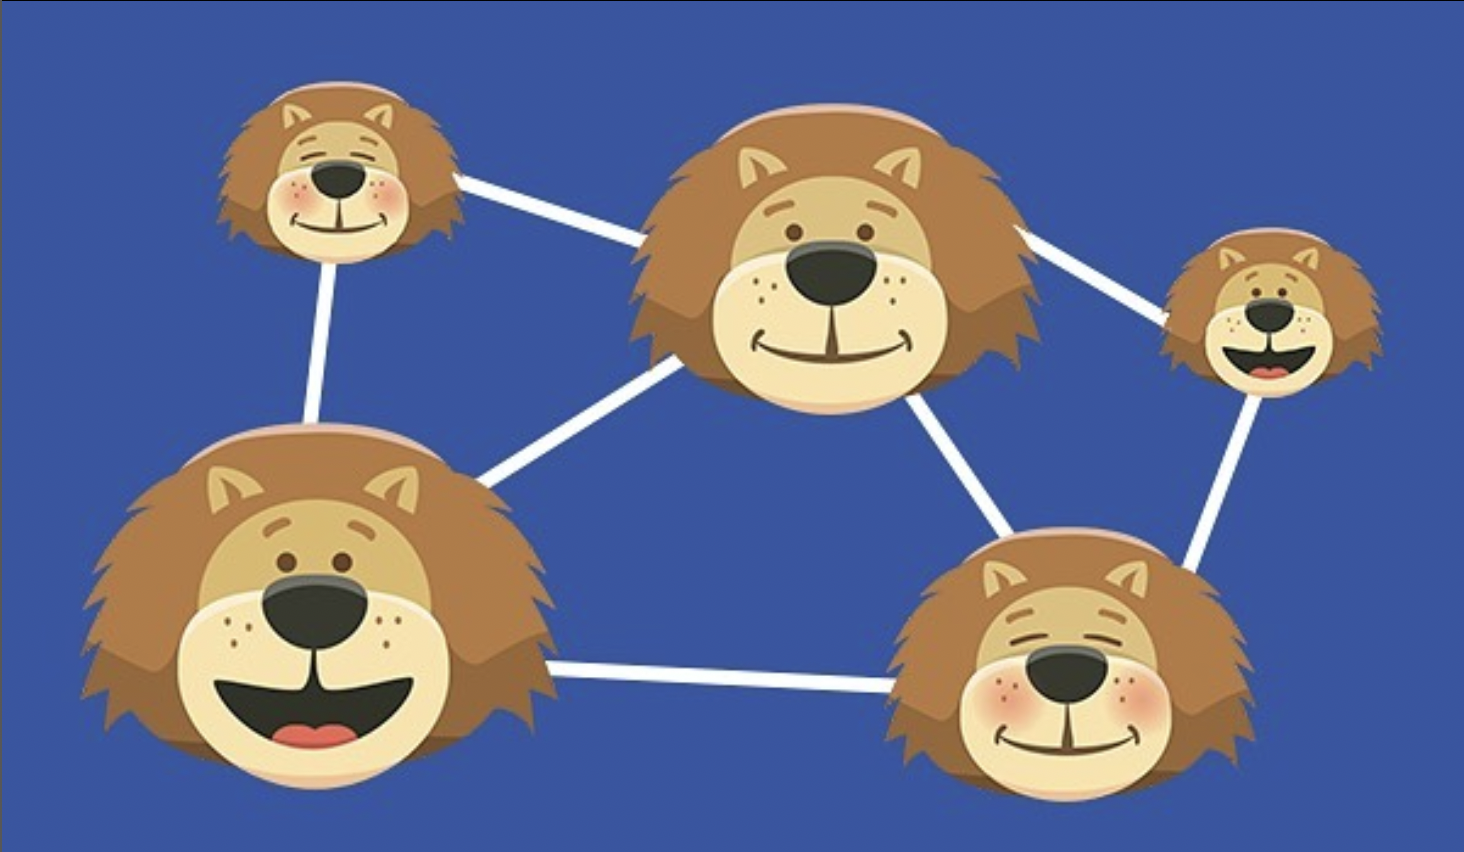 A network of lions